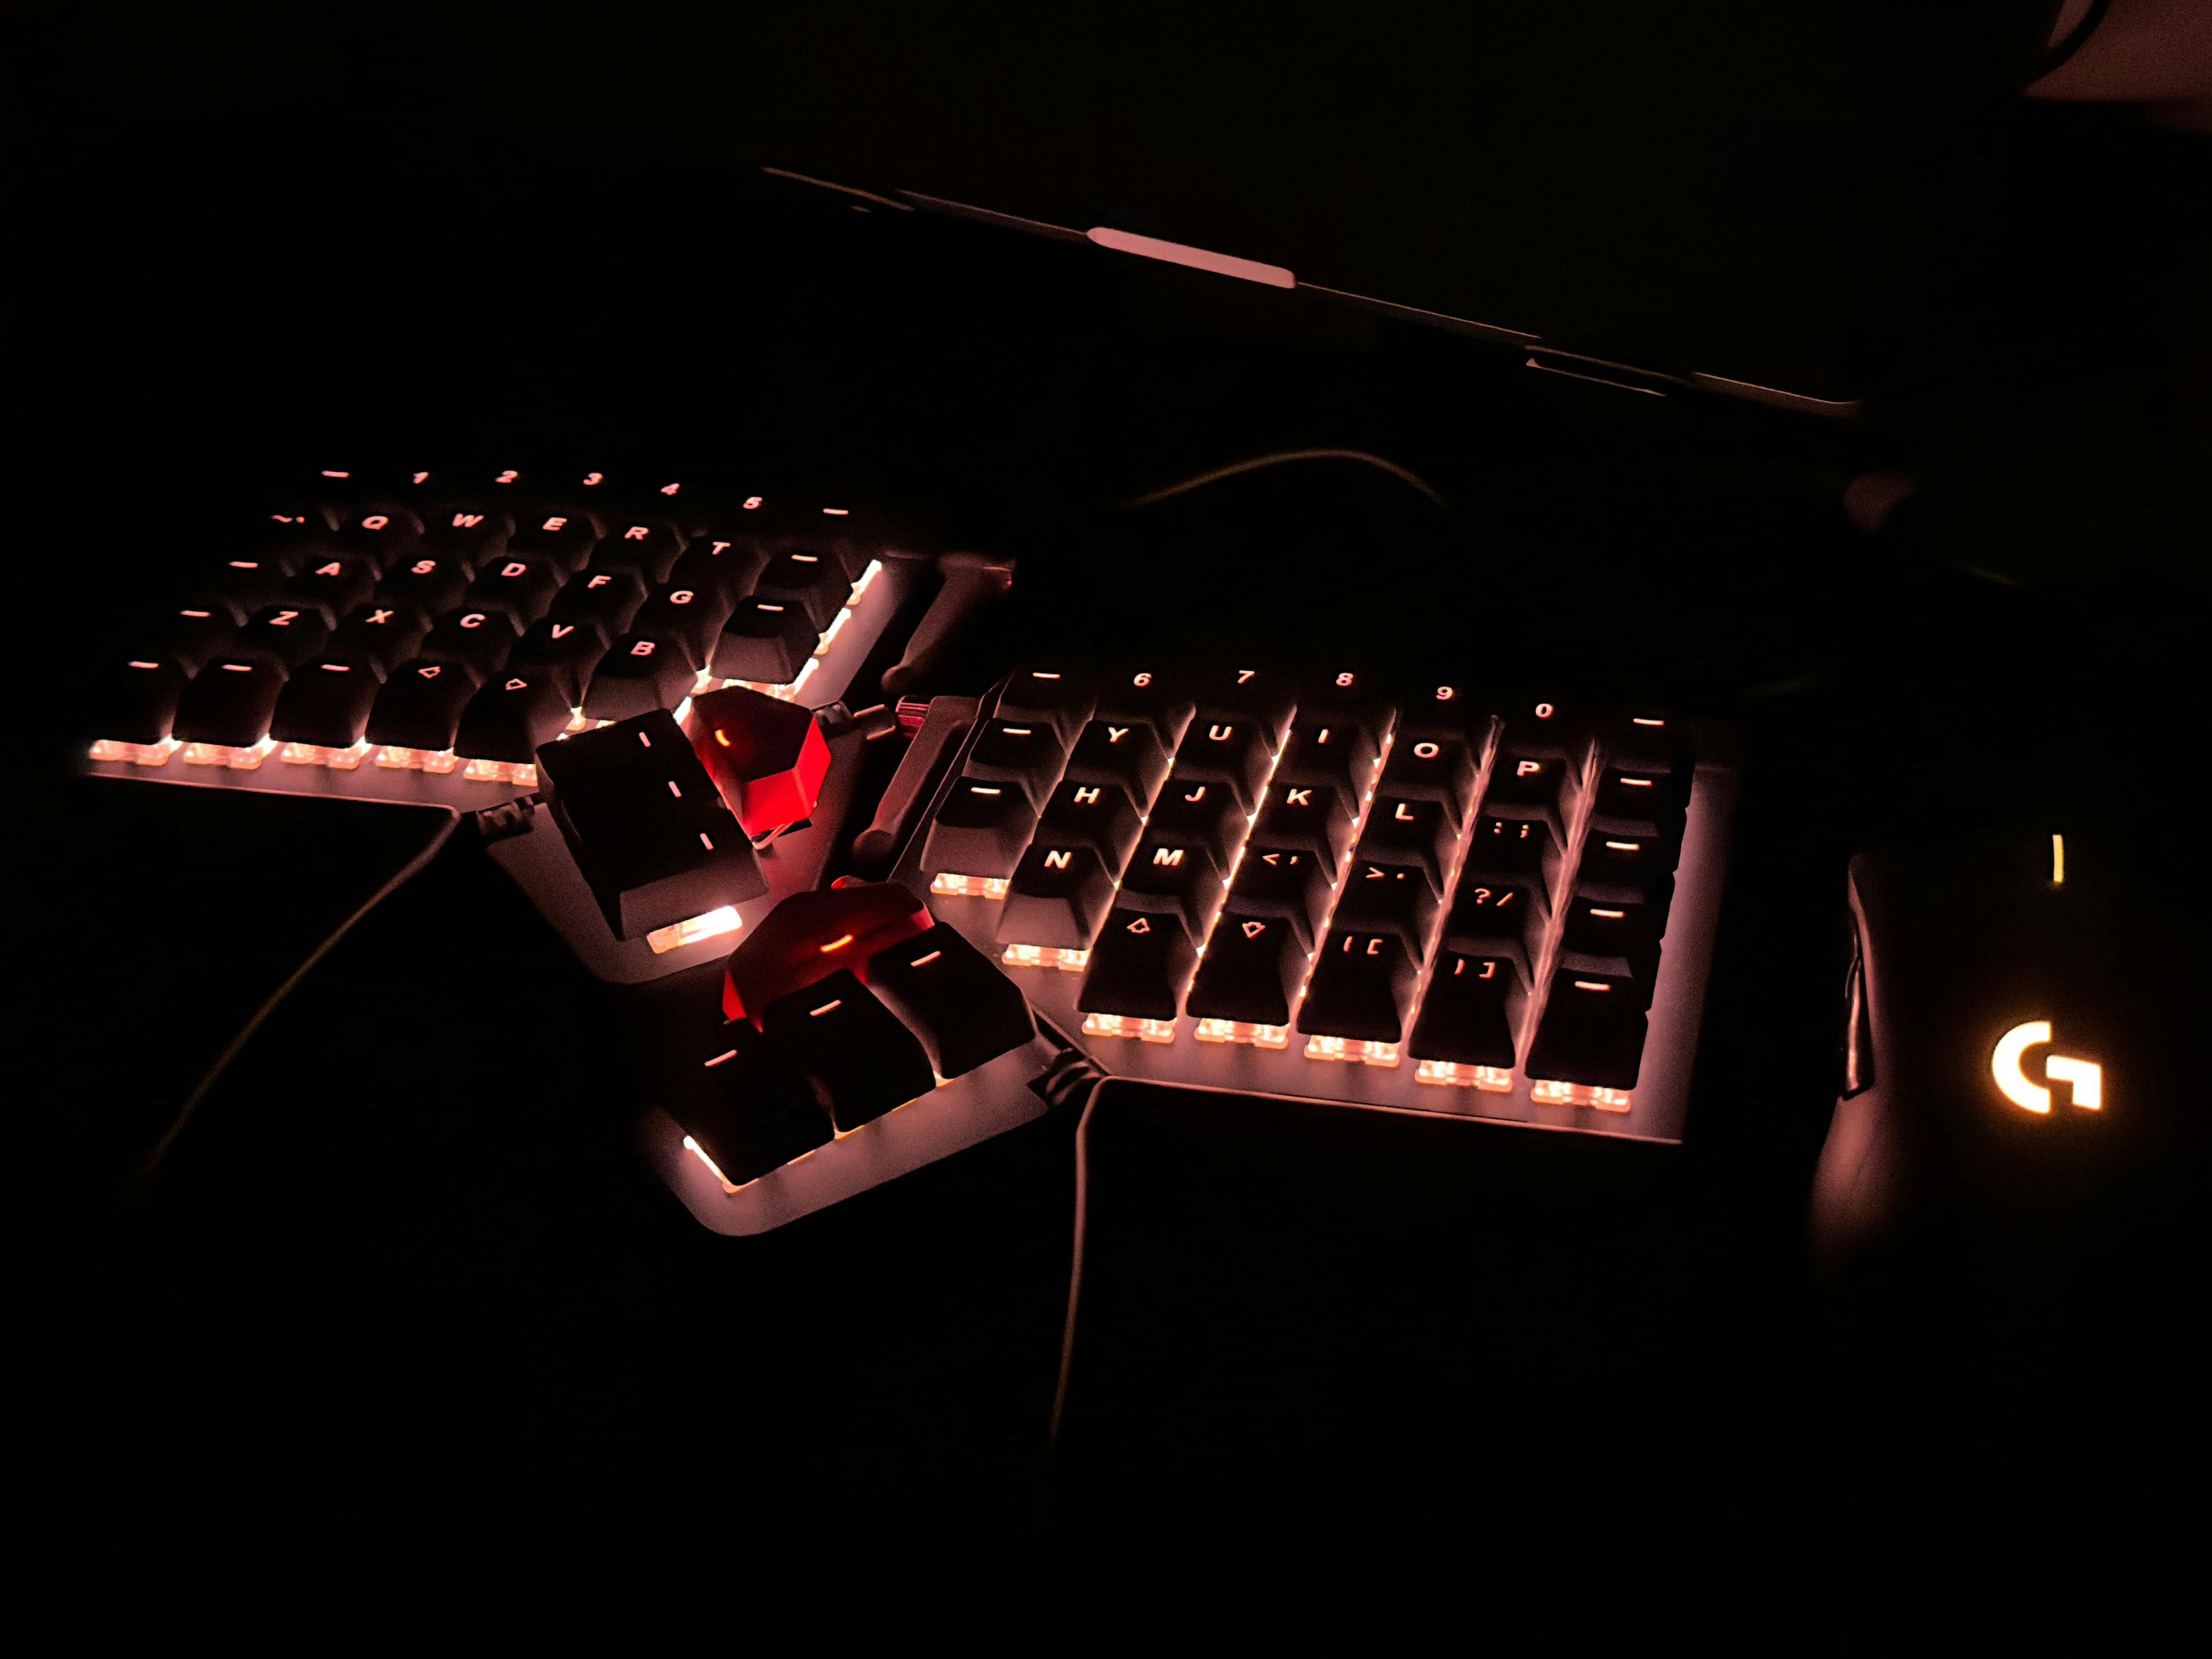 Keyboard and mouse in the dark, both with LED lights shining in an orange color that matches the Vesper theme's orange